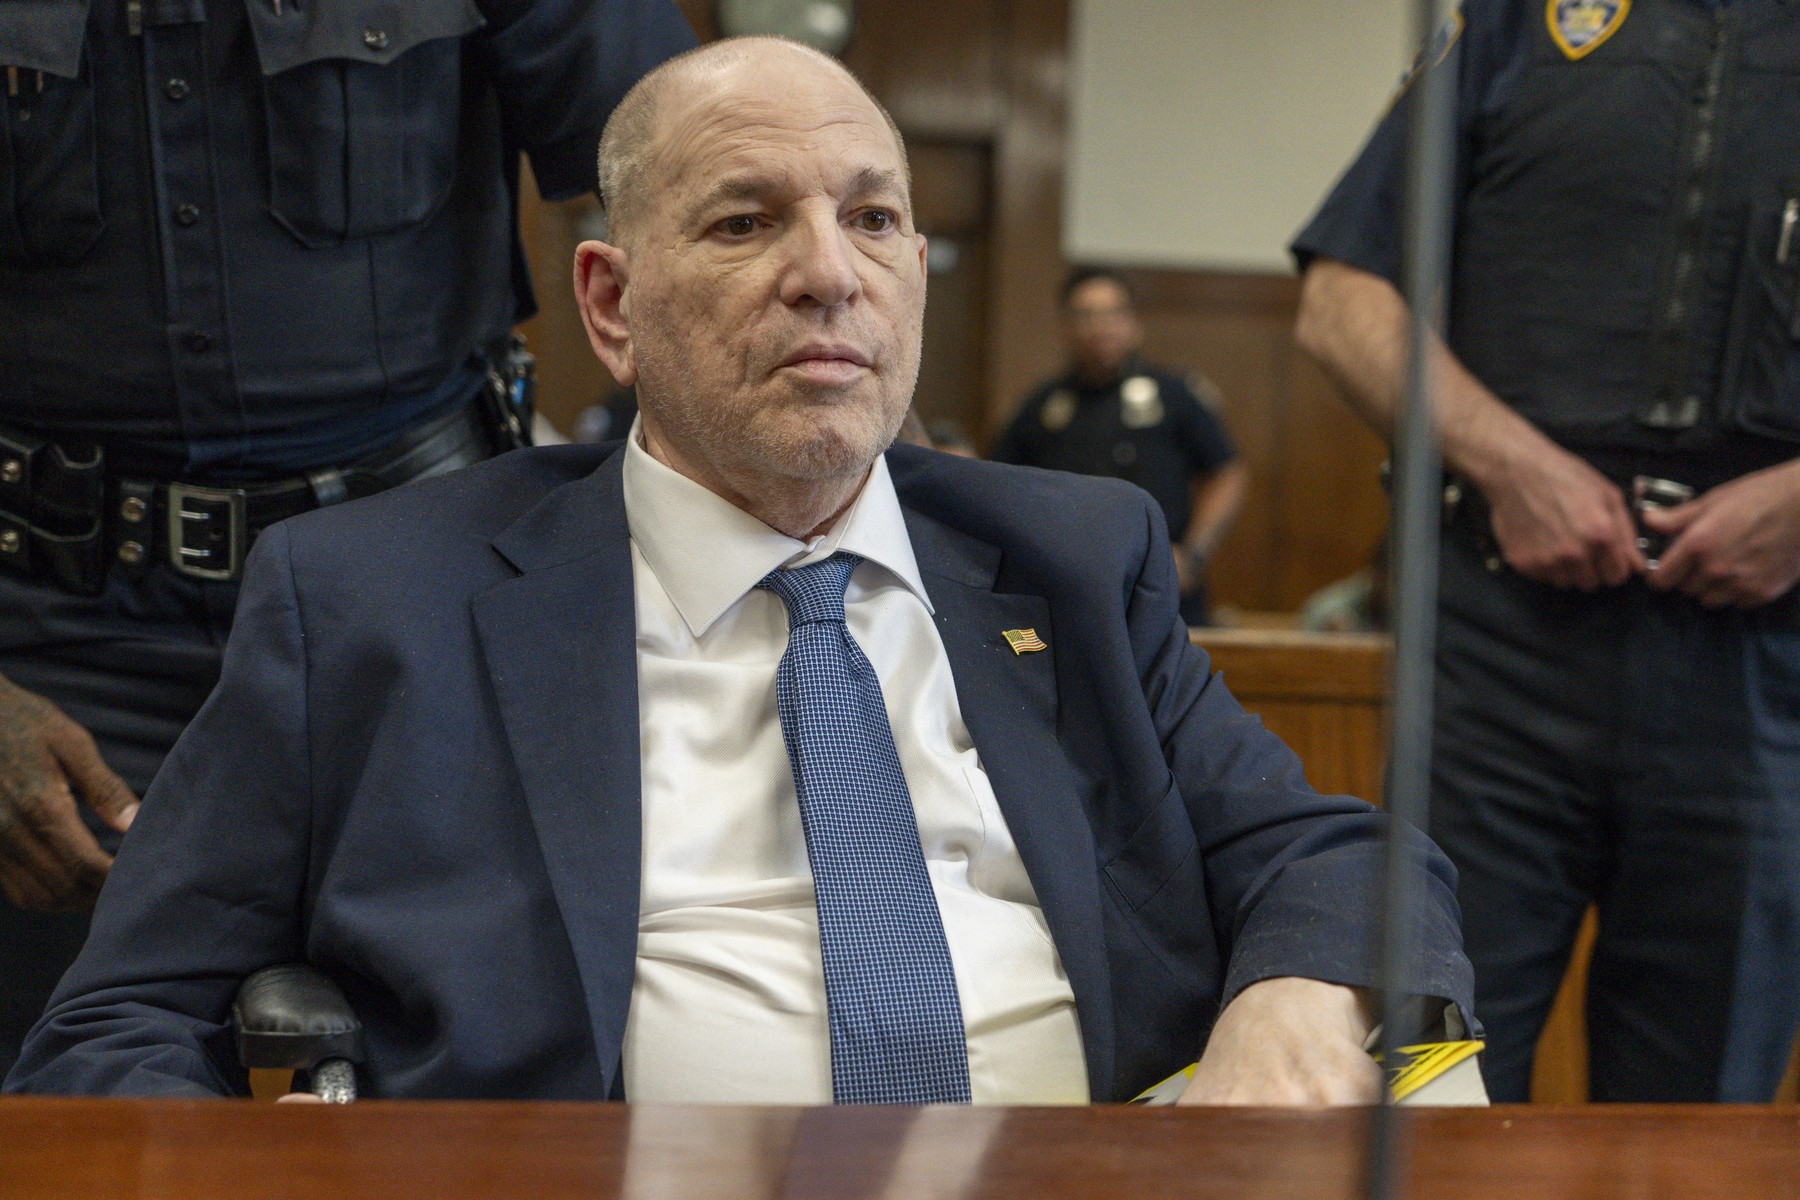 NEW YORK, NEW YORK - MAY 29: Harvey Weinstein appears in Manhattan Criminal Court for a hearing on May 29, 2024 in New York City. The fallen movie mogul is awaiting a retrial on rape charges after his 2020 conviction was tossed out. The court hearing addressed various legal issues related to the upcoming trial, tentatively scheduled for after Labor Day.   Steven Hirsch-Pool,Image: 877441548, License: Rights-managed, Restrictions: , Model Release: no, Credit line: POOL / Getty images / Profimedia